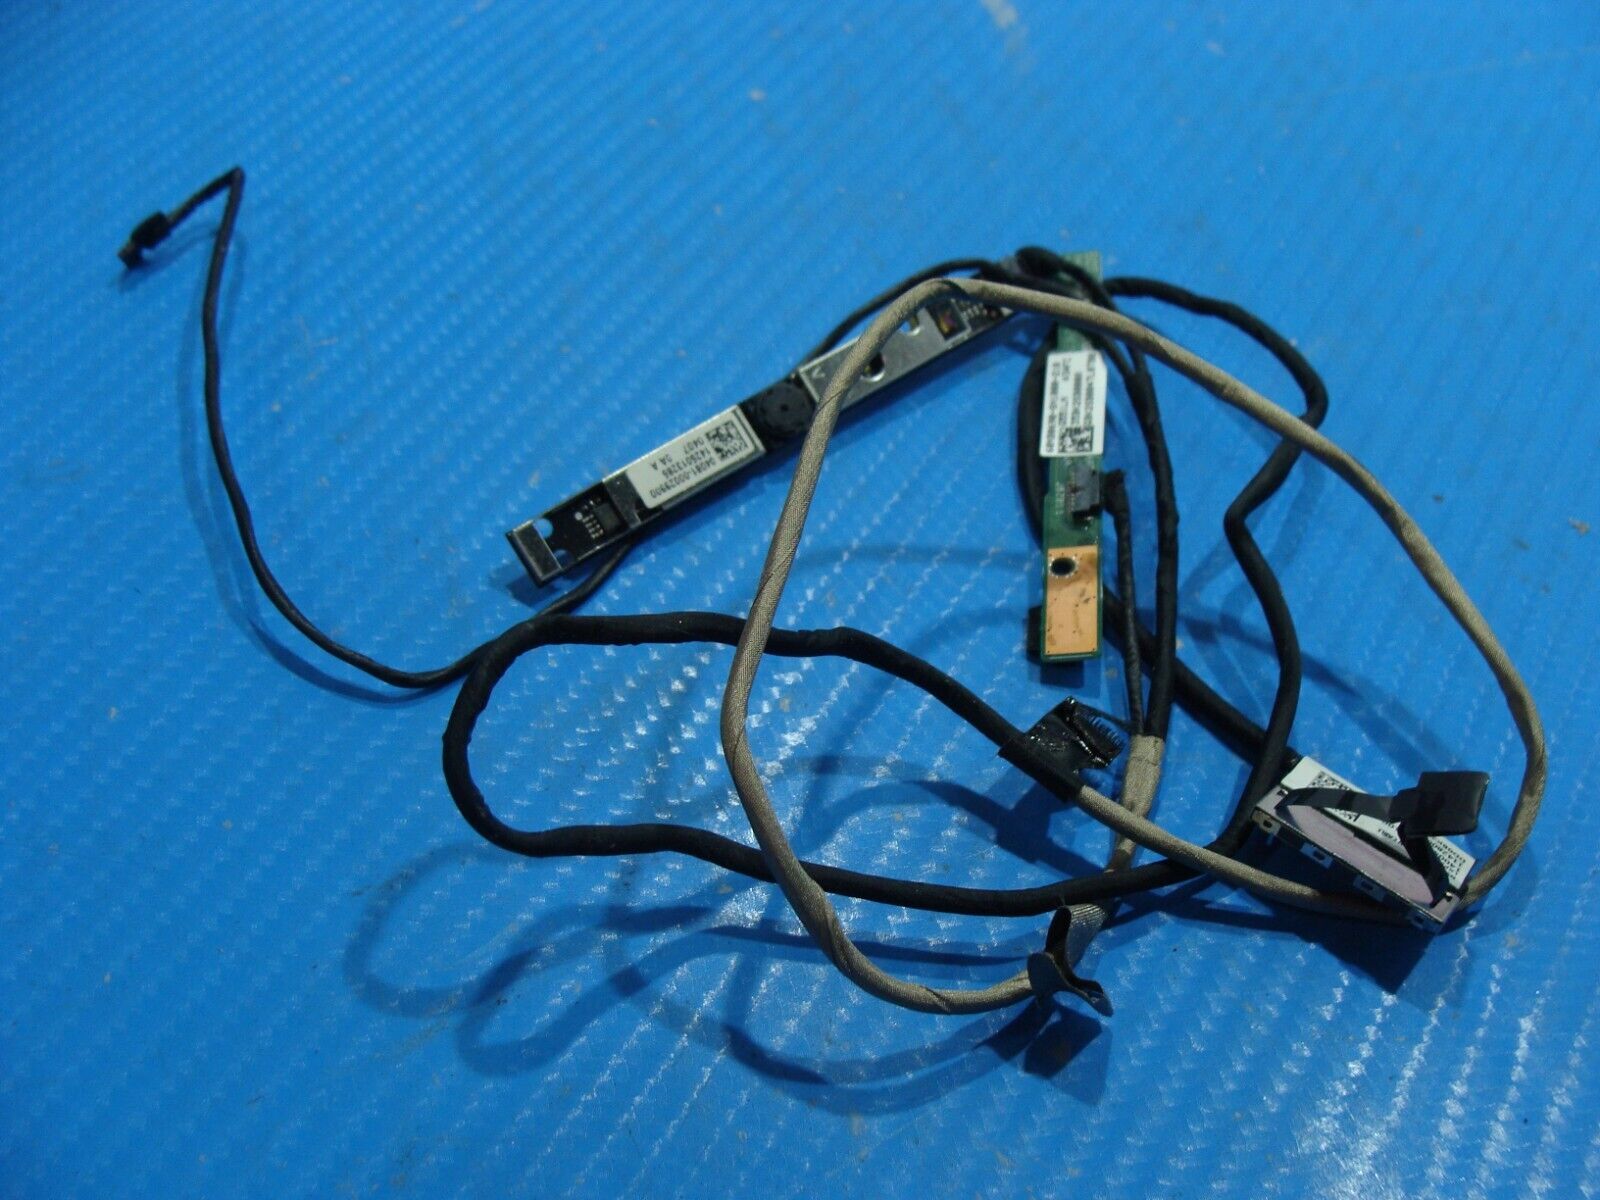 Asus Q551LN-BBI706 LCD Video Cable w/WebCam & Mic Board & Cable 04081-00029900